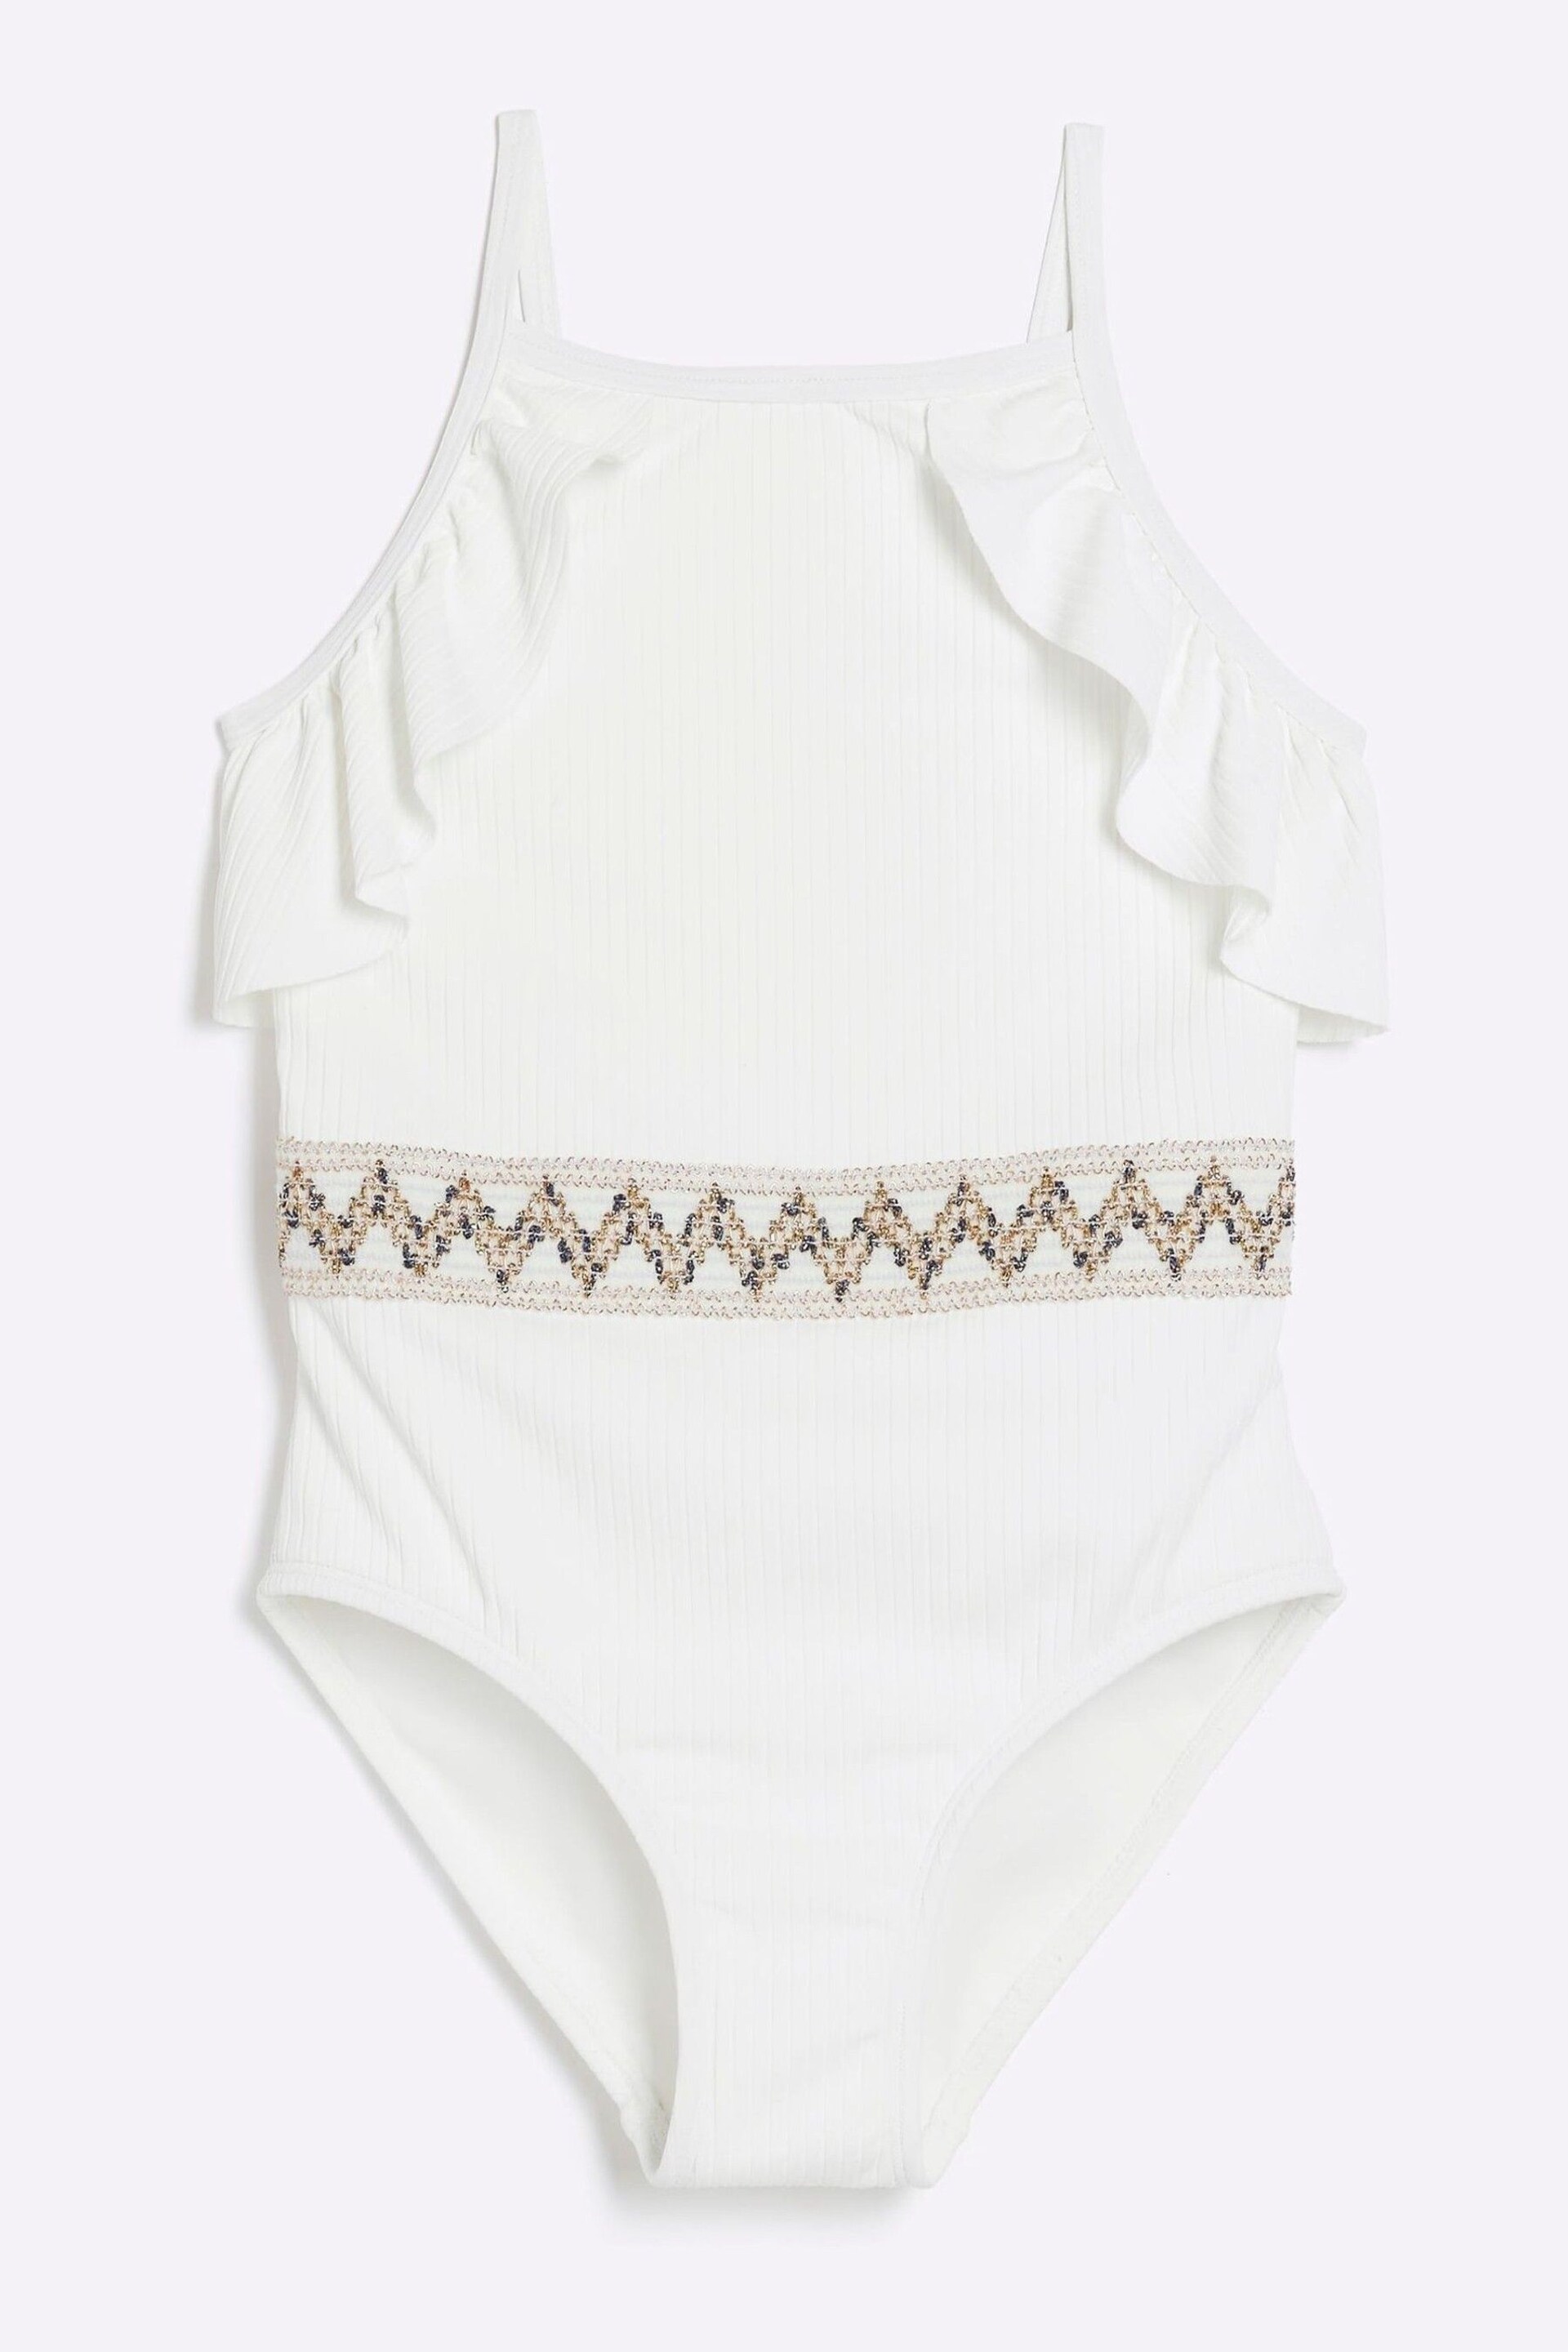 River Island White Girls Ombre Glitter Swimsuit - Image 1 of 3